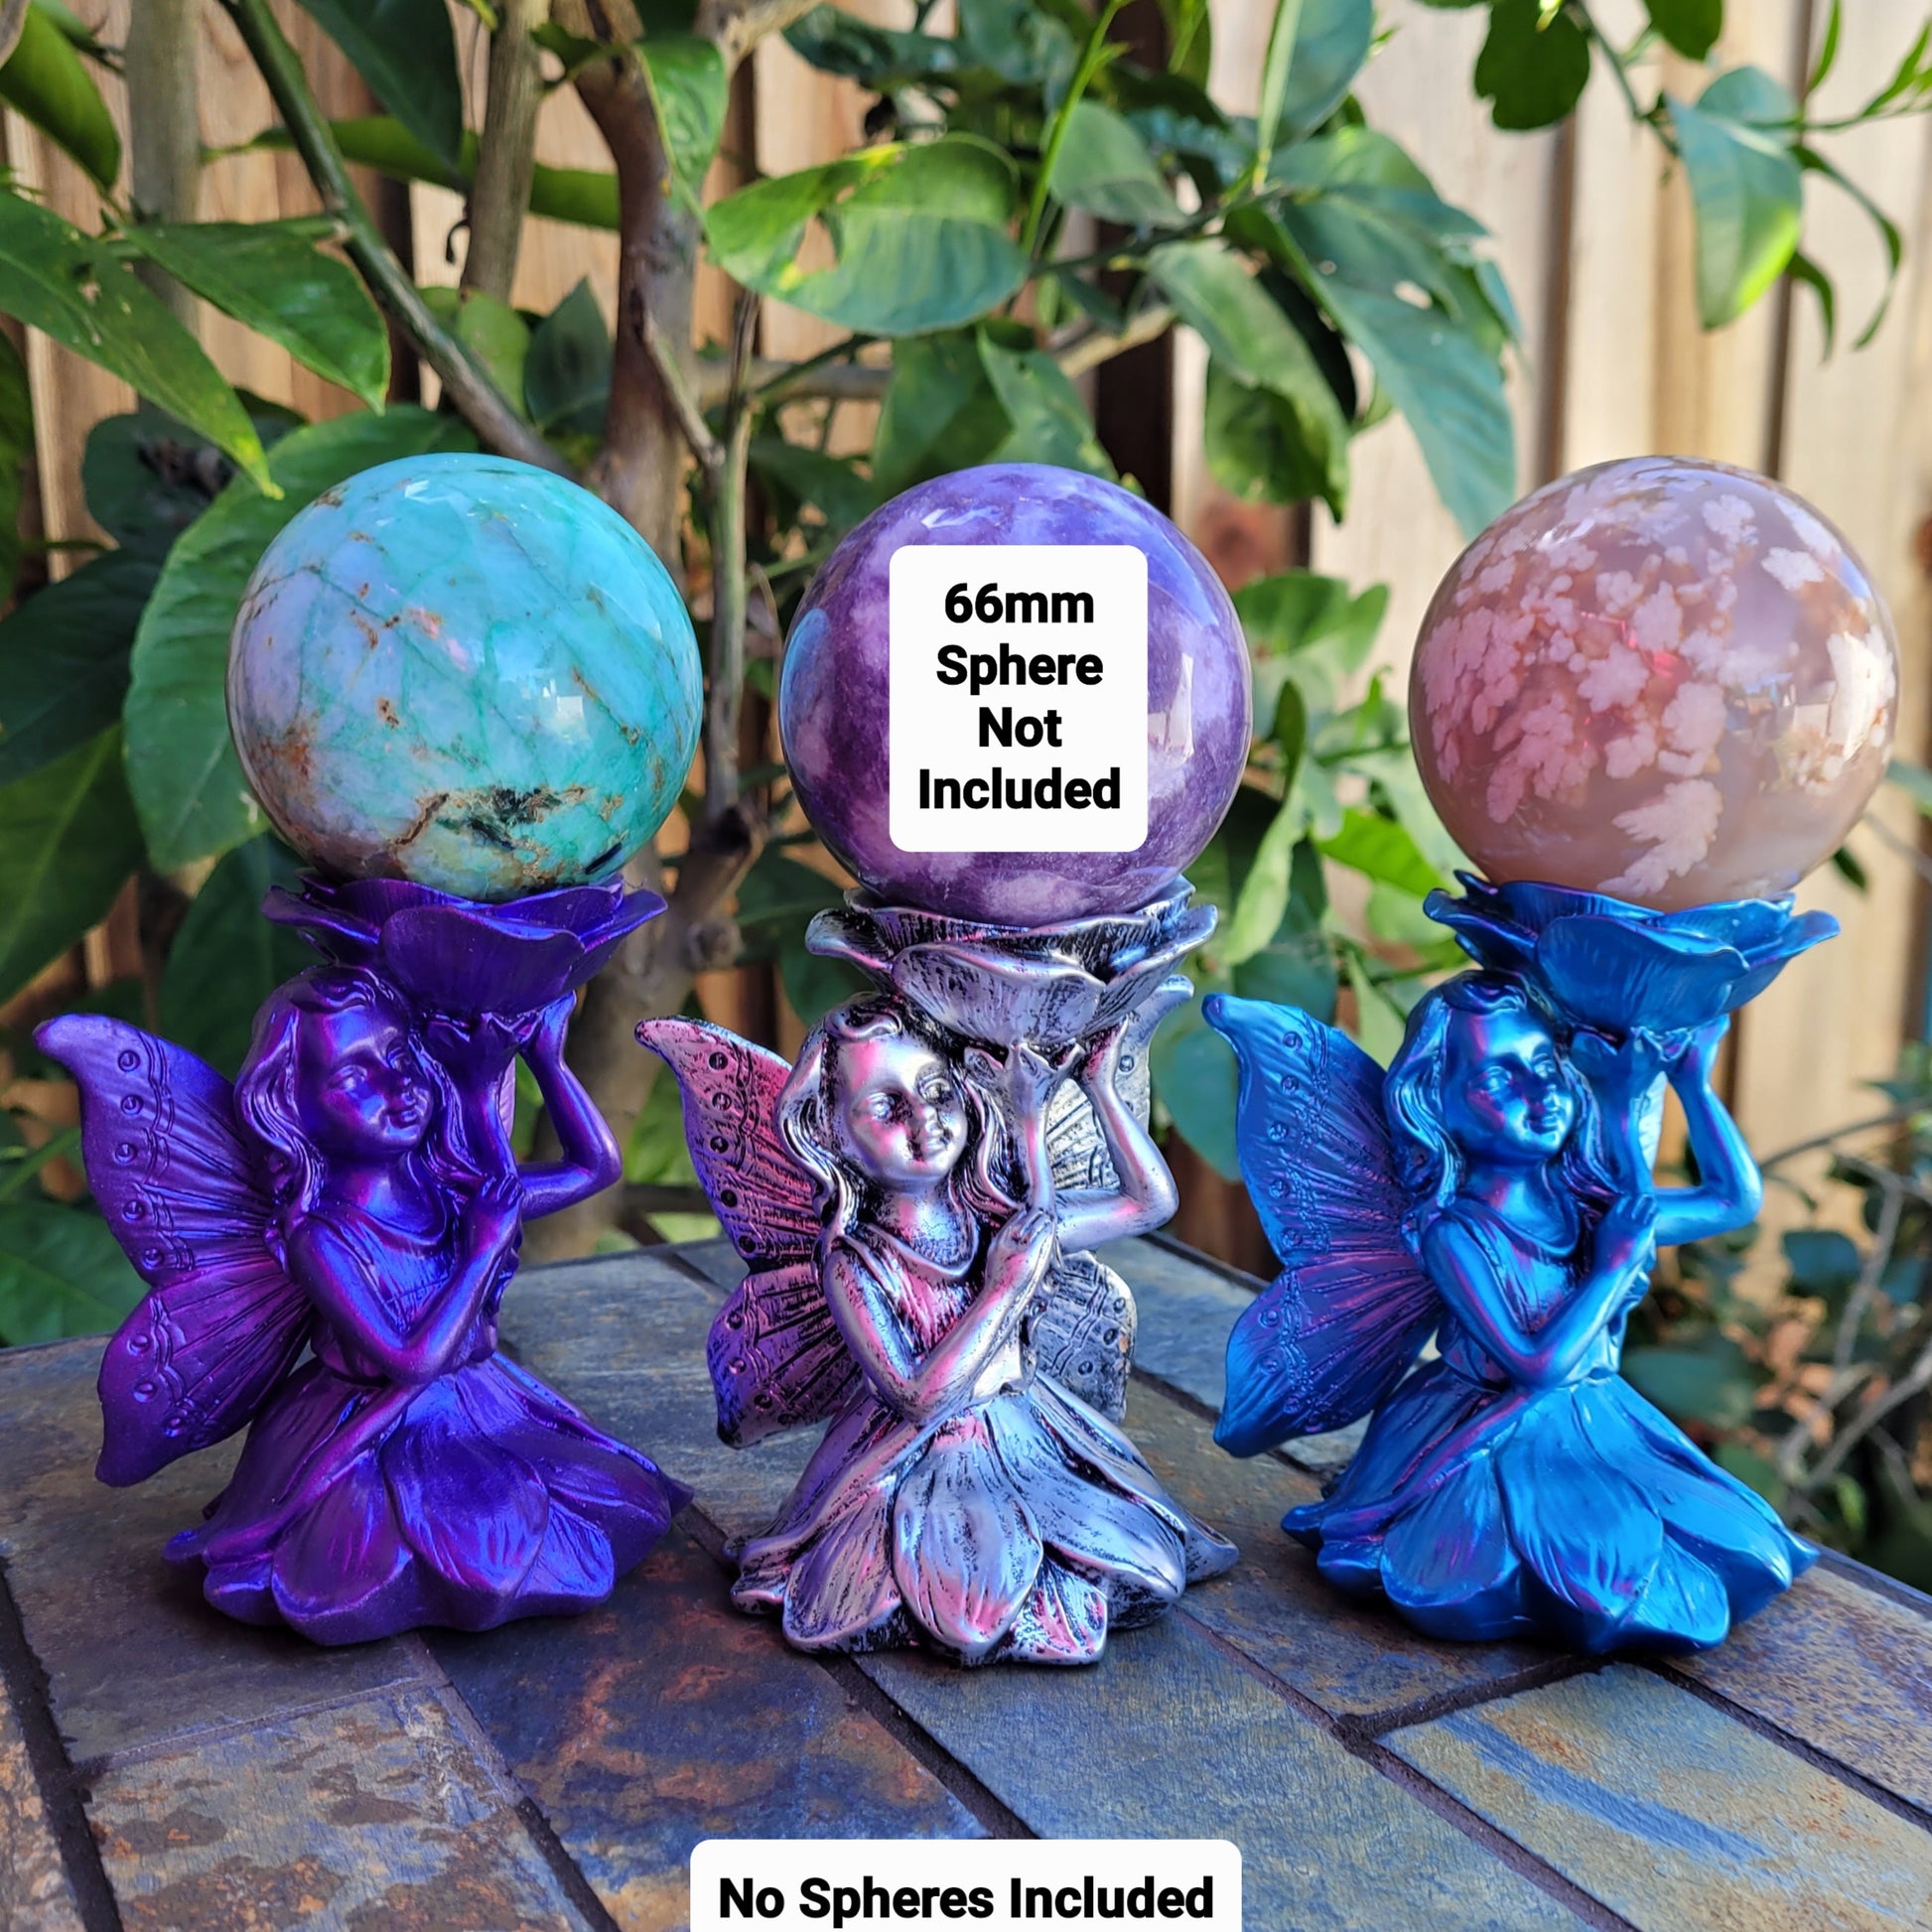 Fairy Sphere Display Stands in 3 Colors, for Crystal Balls or Eggs 1" to 4" (26mm to 102mm)